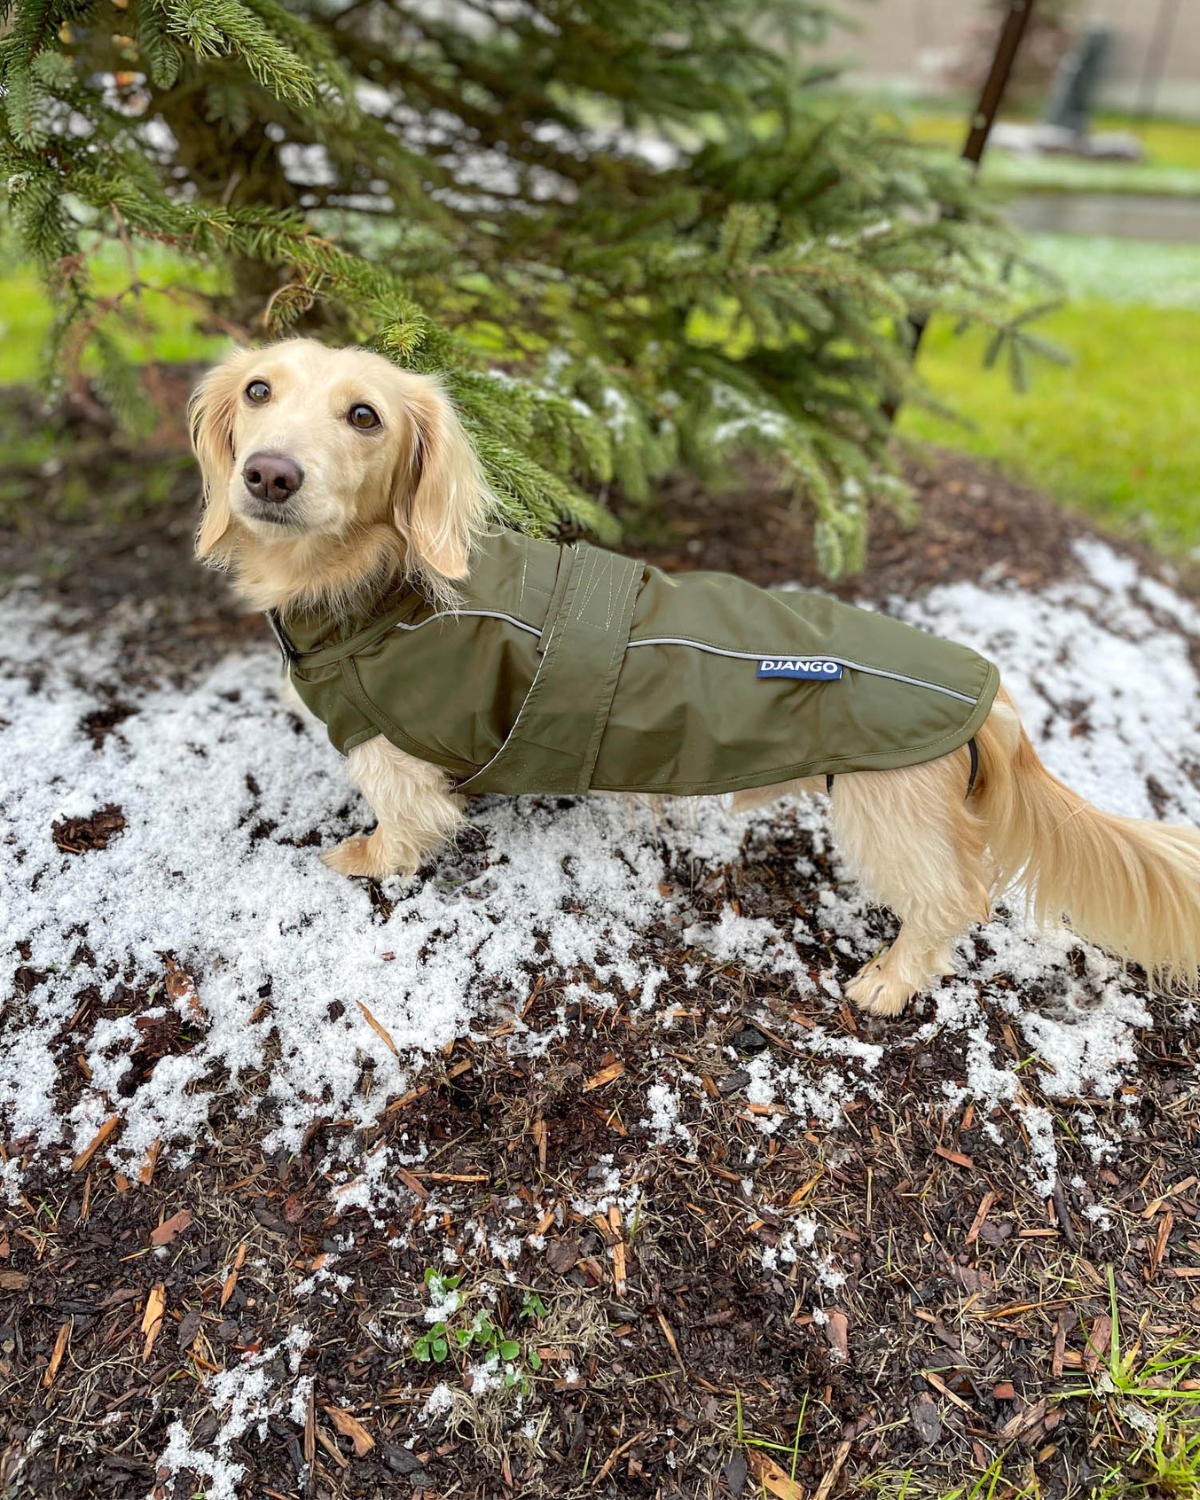 DJANGO's City Slicker Dog Jacket and Raincoat is a beautiful, lightweight dog jacket and water-resistant dog raincoat designed for spring showers, chilly autumn days, and snowy winter walks - djangobrand.com